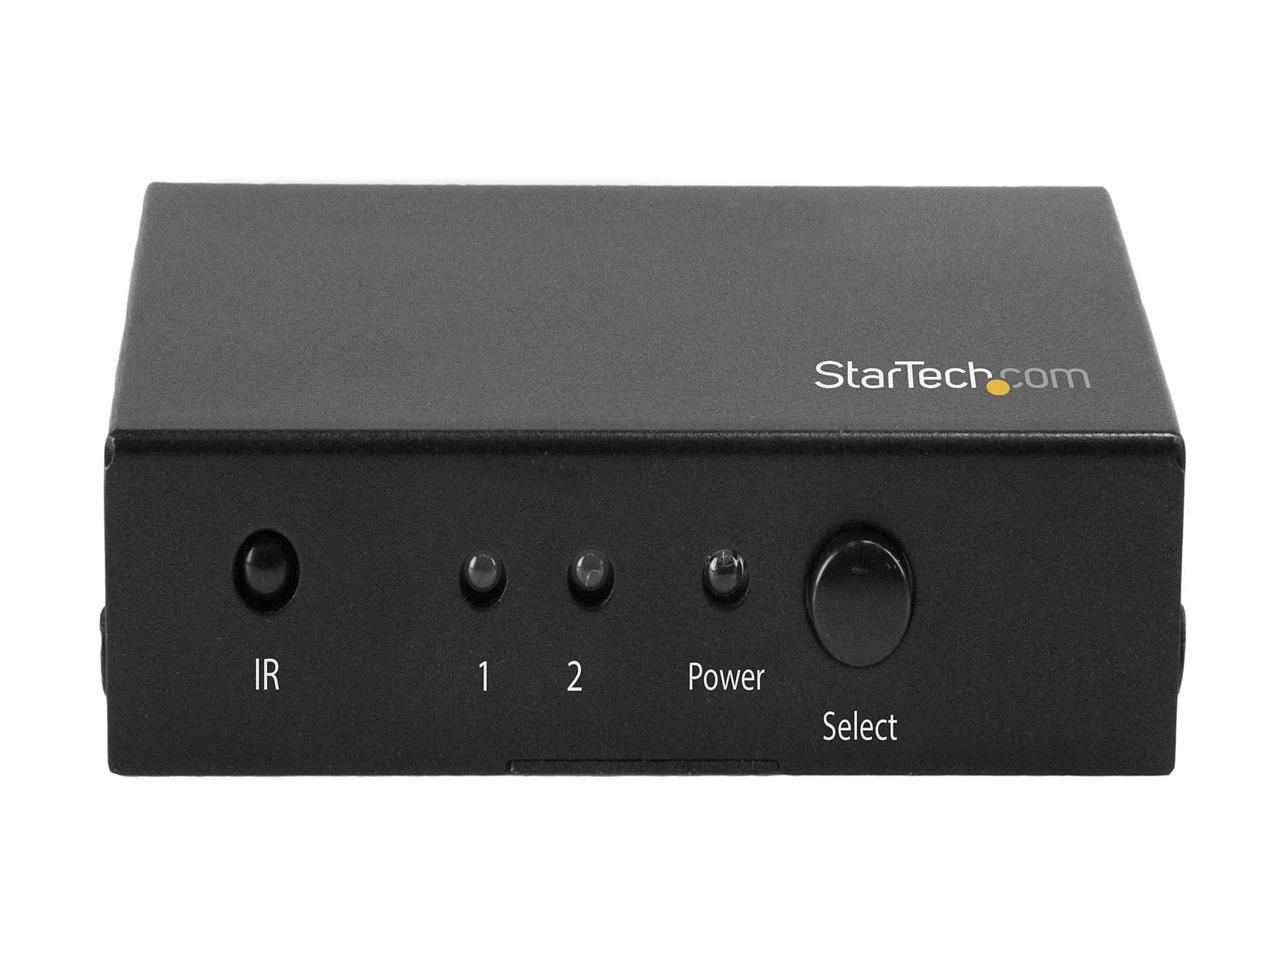 StarTech.com VS221HD20 2-Port HDMI Switch - 4K 60Hz - Supports HDCP - IR - HDMI Selector - HDMI Multiport Video Switcher - HDMI Switcher